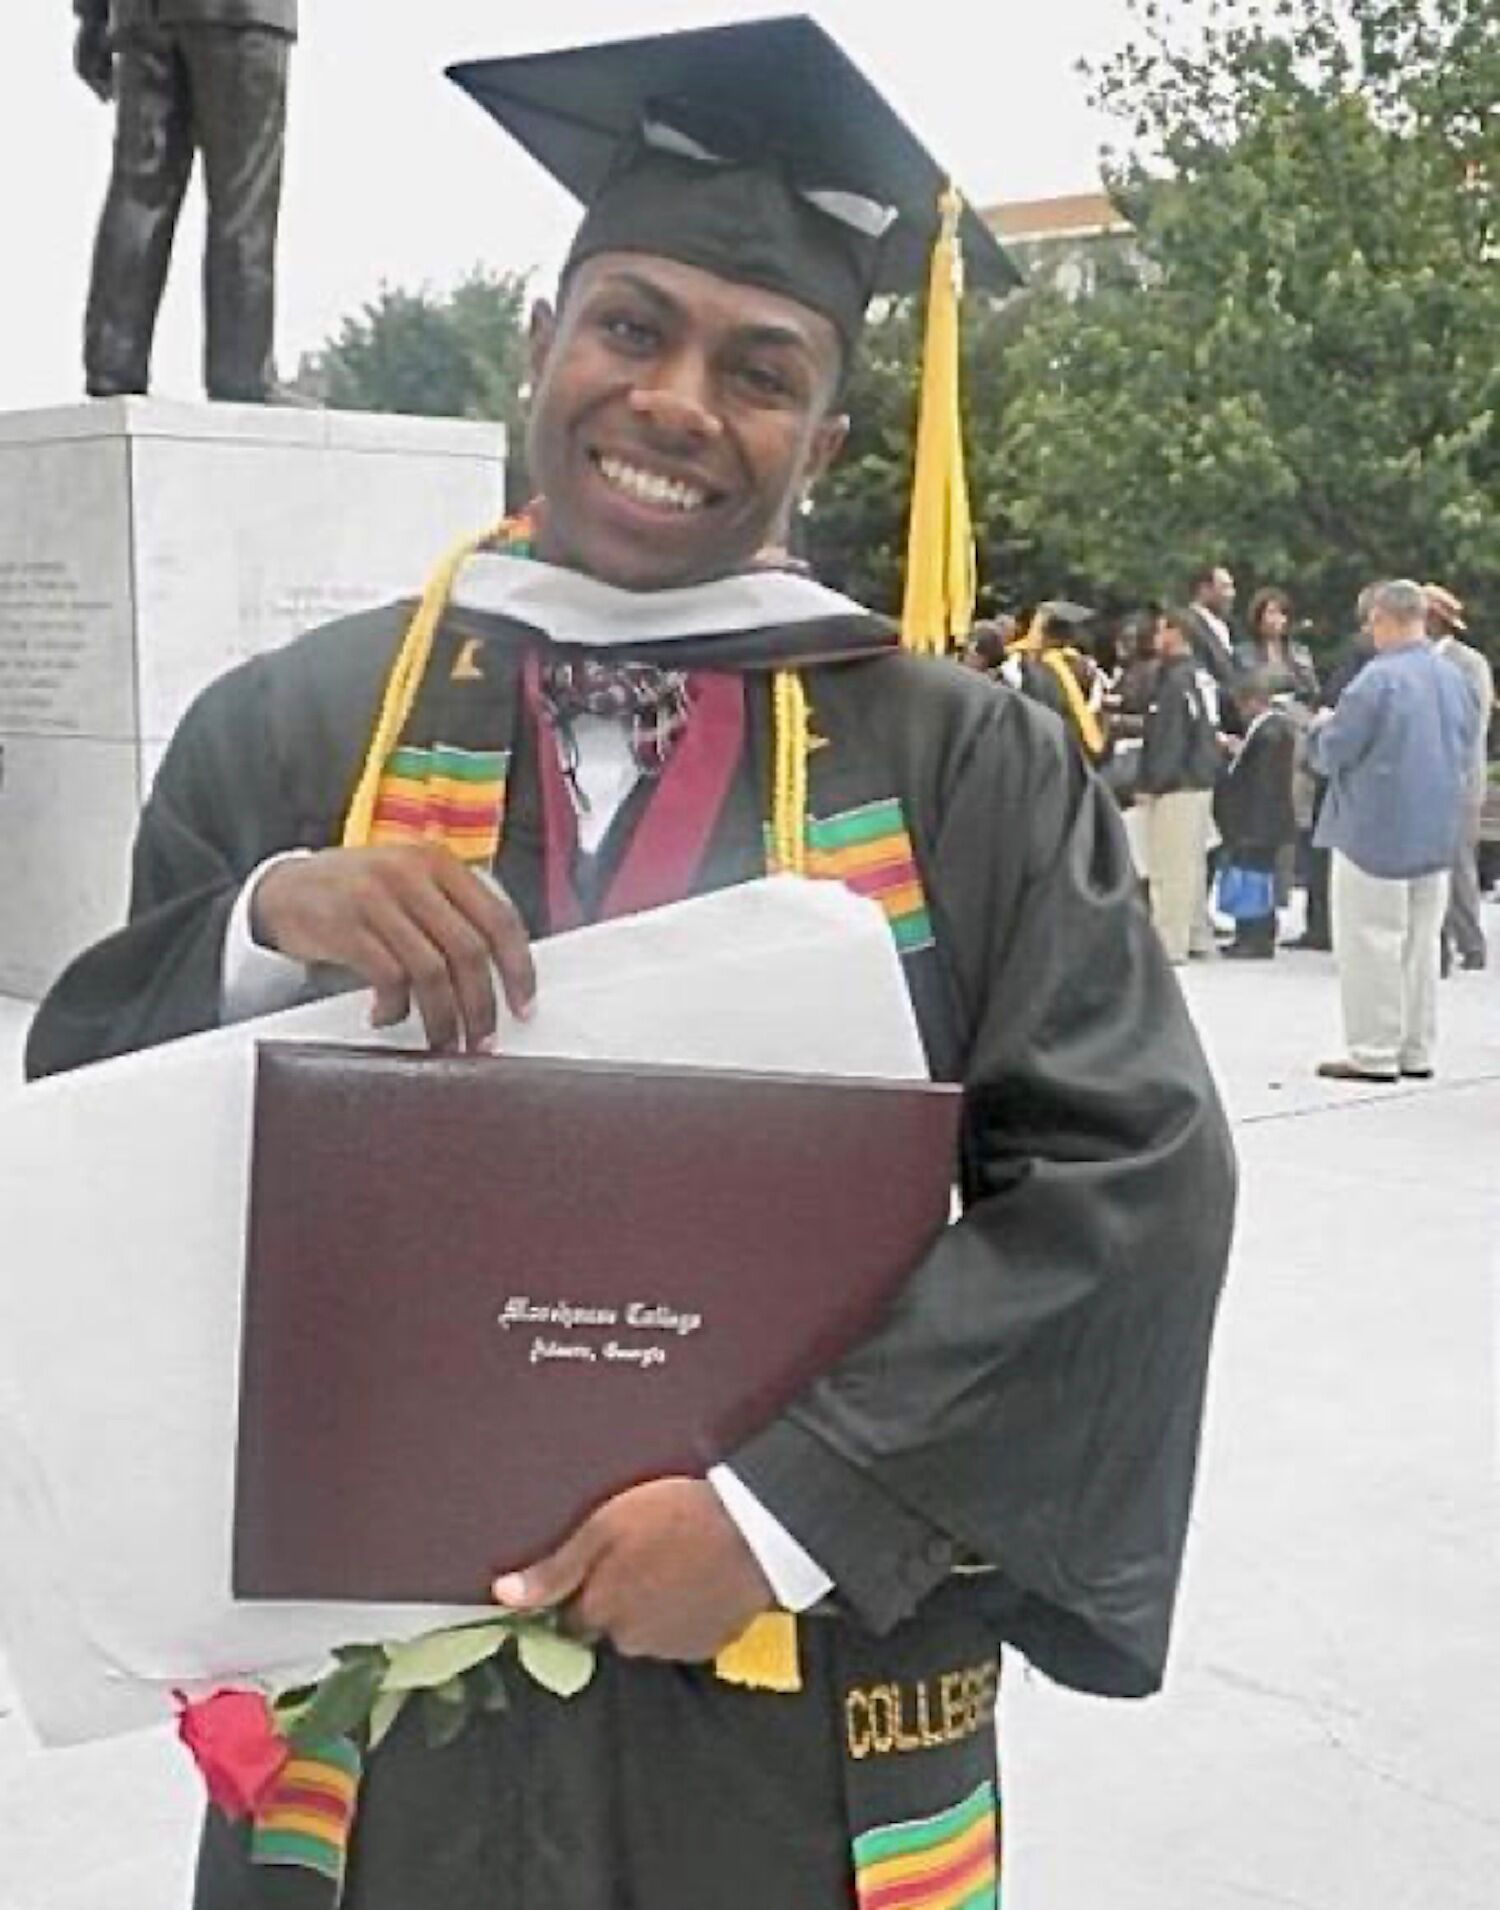 Brian Alston-Carter on graduation day in 2011 at Morehouse College in Atlanta. Photo provided by Brian Alston-Carter